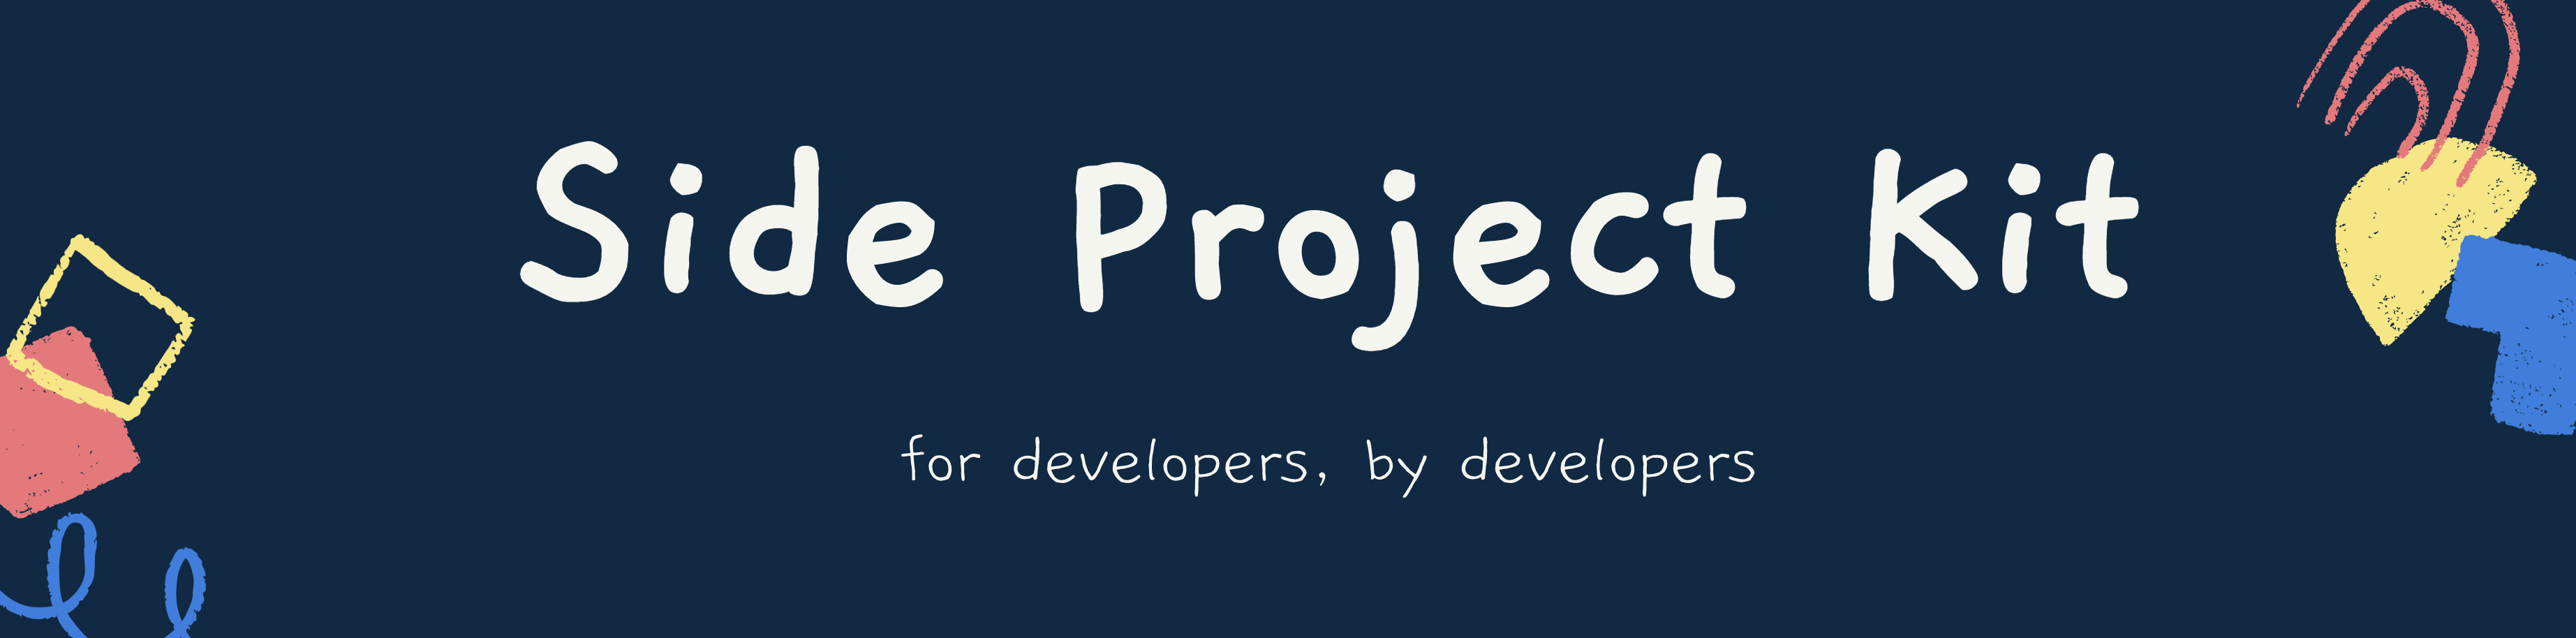 Side Project Kit - for developers, by developers